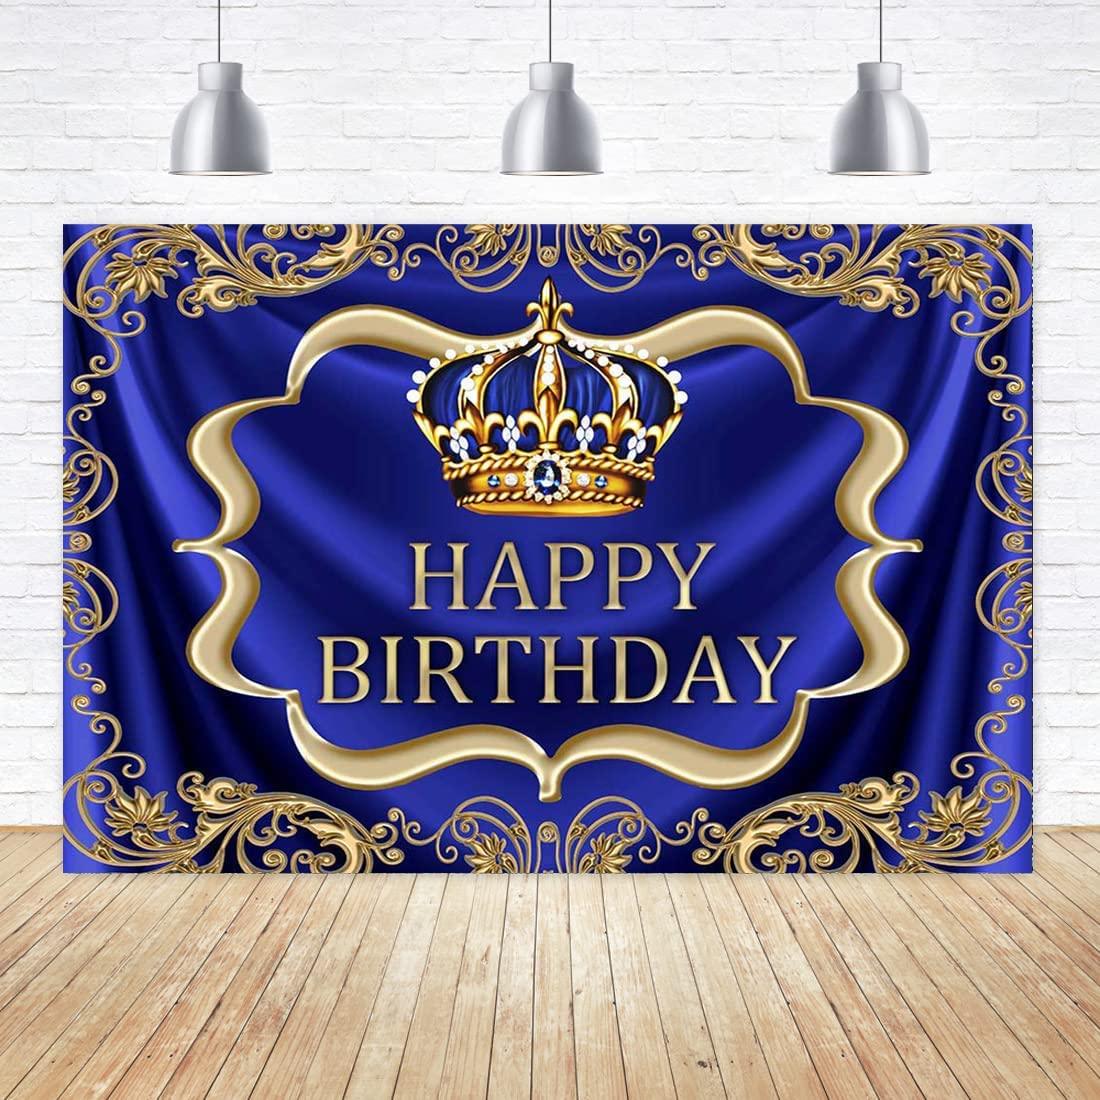 Royal Blue and Gold Happy Birthday Backdrop Little Baby Boy Prince King Crown Photography Background - If you say i do